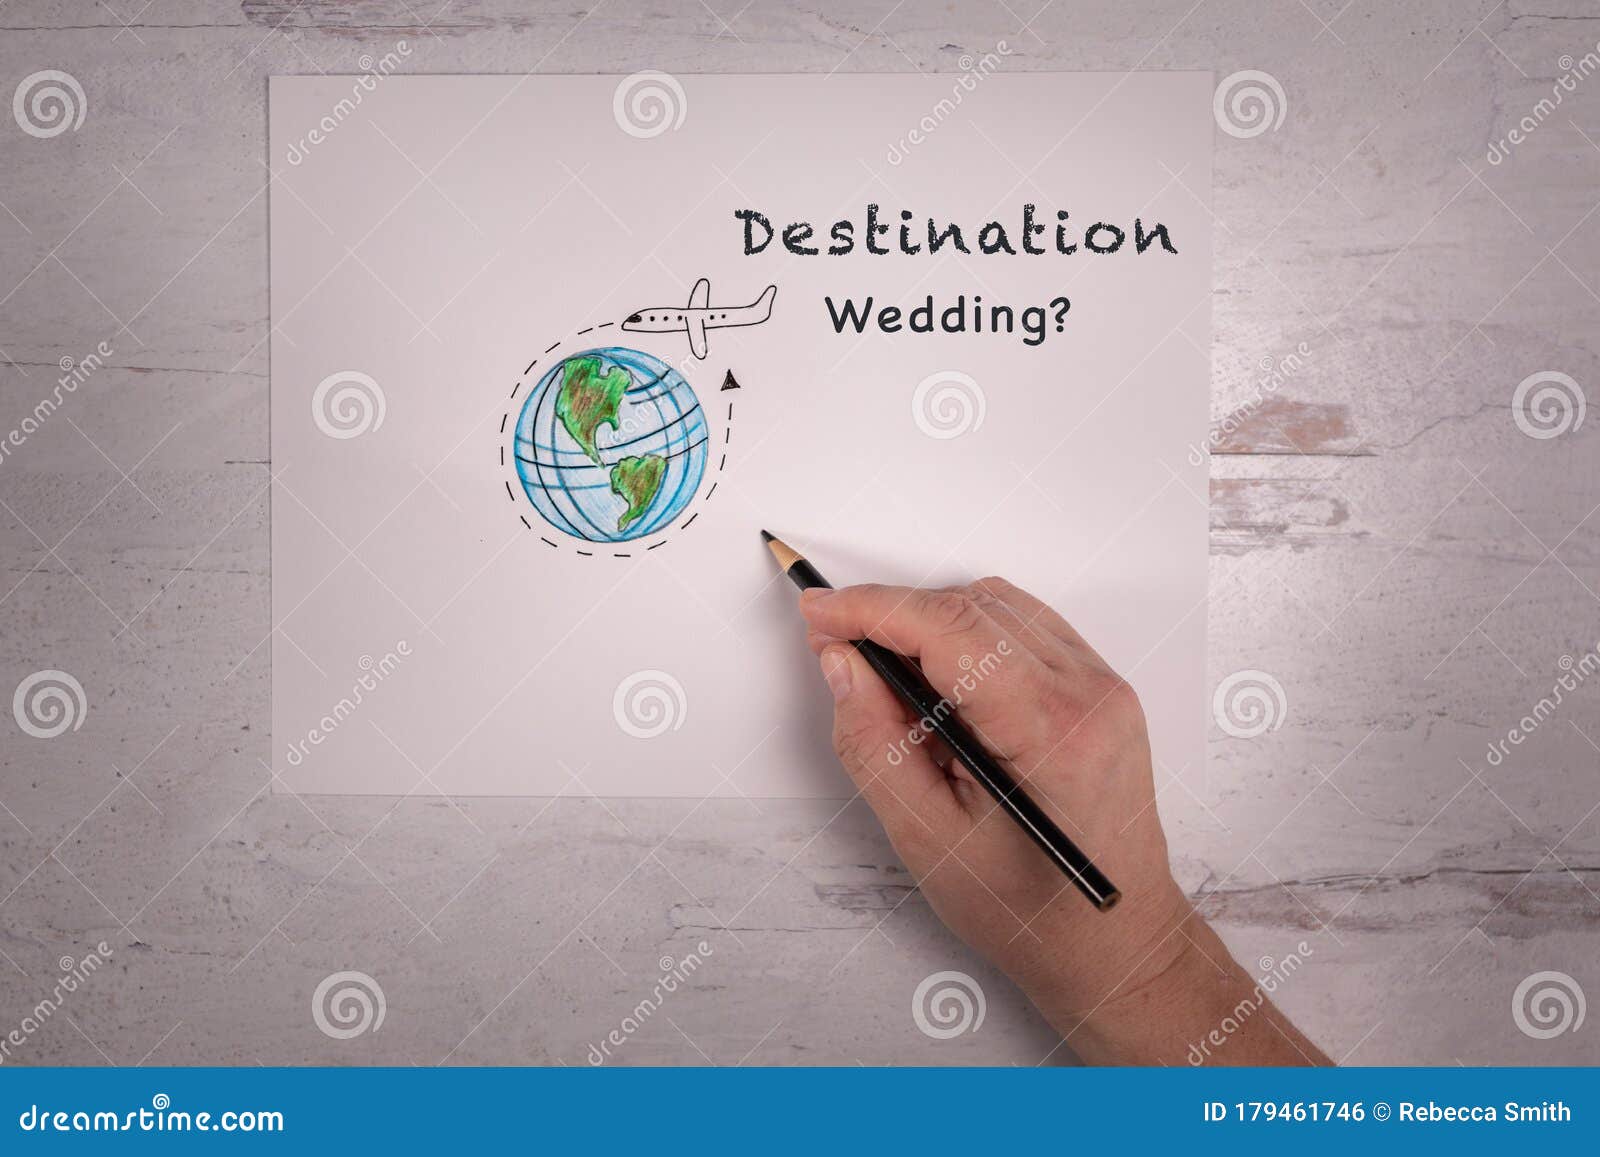 destination wedding sign sketch of the world with airplane doodle